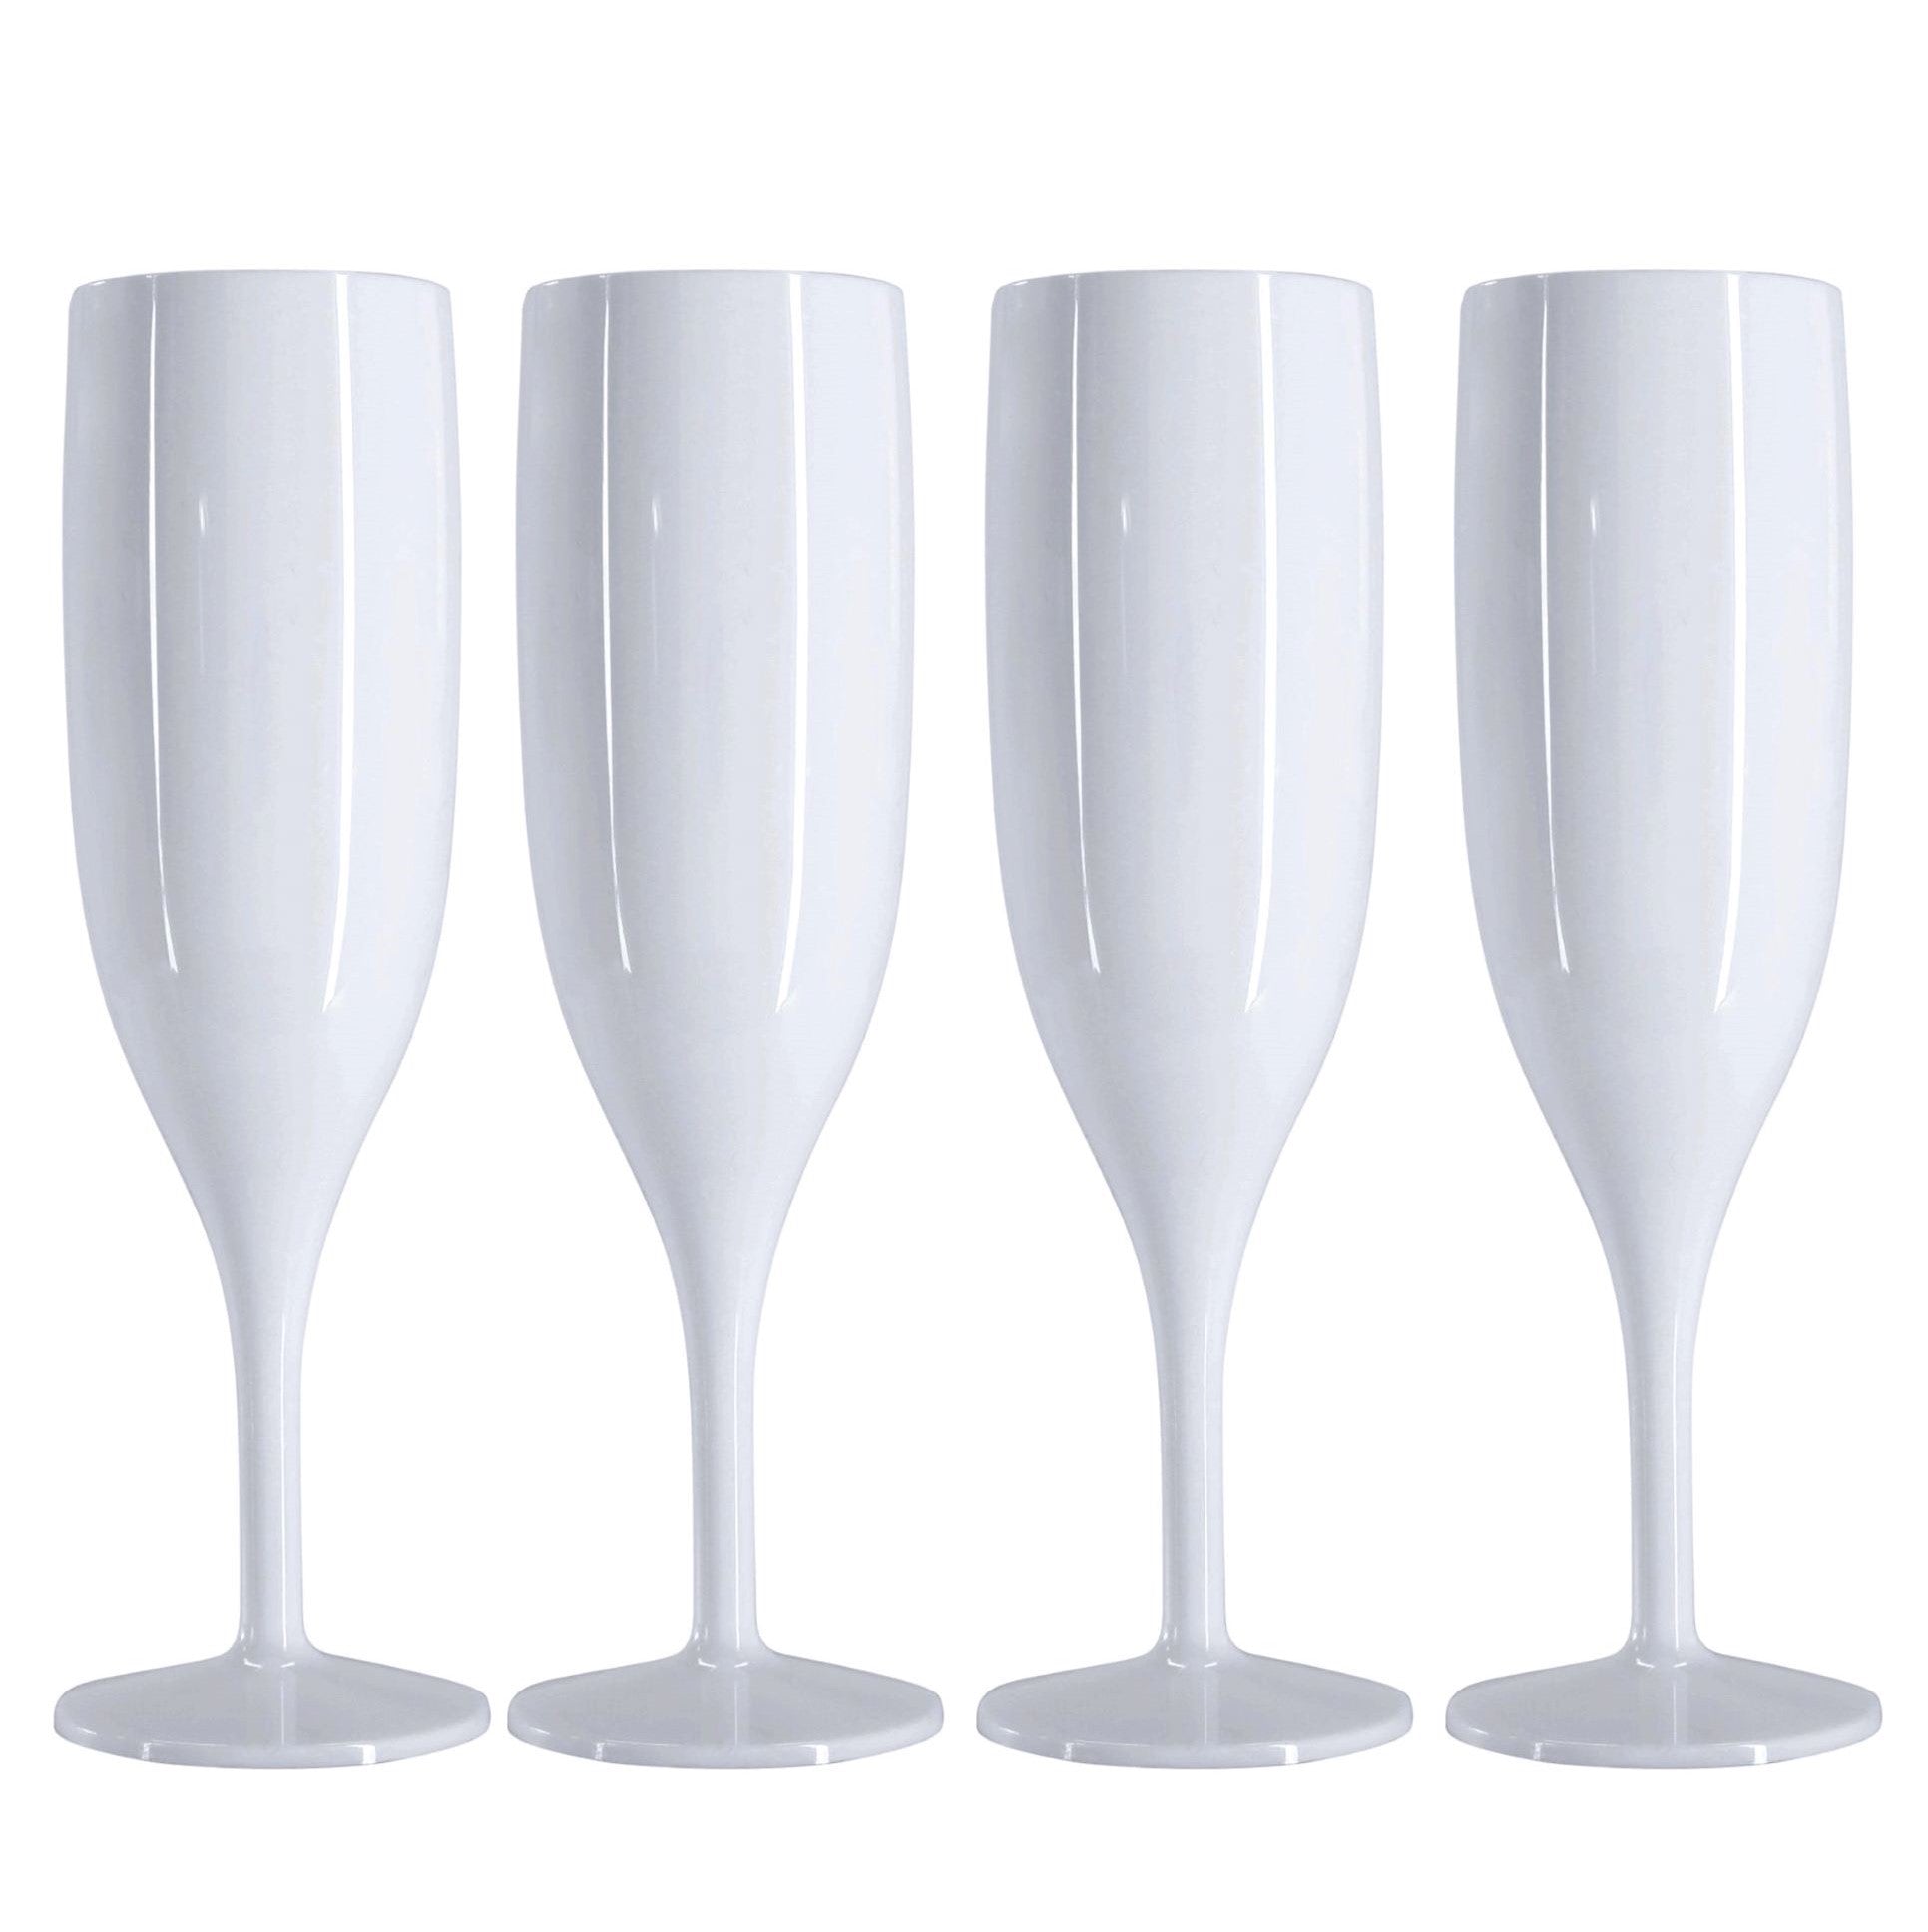 12 x White Prosecco Flutes – Made from Strong Reusable Plastic in glossy Bright White Colour 1-Piece Champagne Glass (Pack of 12 Glasses) for use Indoors and Outdoors, Wedding, Parties, Bridal Shower-5056020186236-EY-PP-077-Product Pro-Baby Shower, Bridal Shower, Hen Do, Reusable Flutes, White Champagne Flutes, White Champagne Glasses, White Flutes, White Prosecco Flutes, White Prosecco Glasses